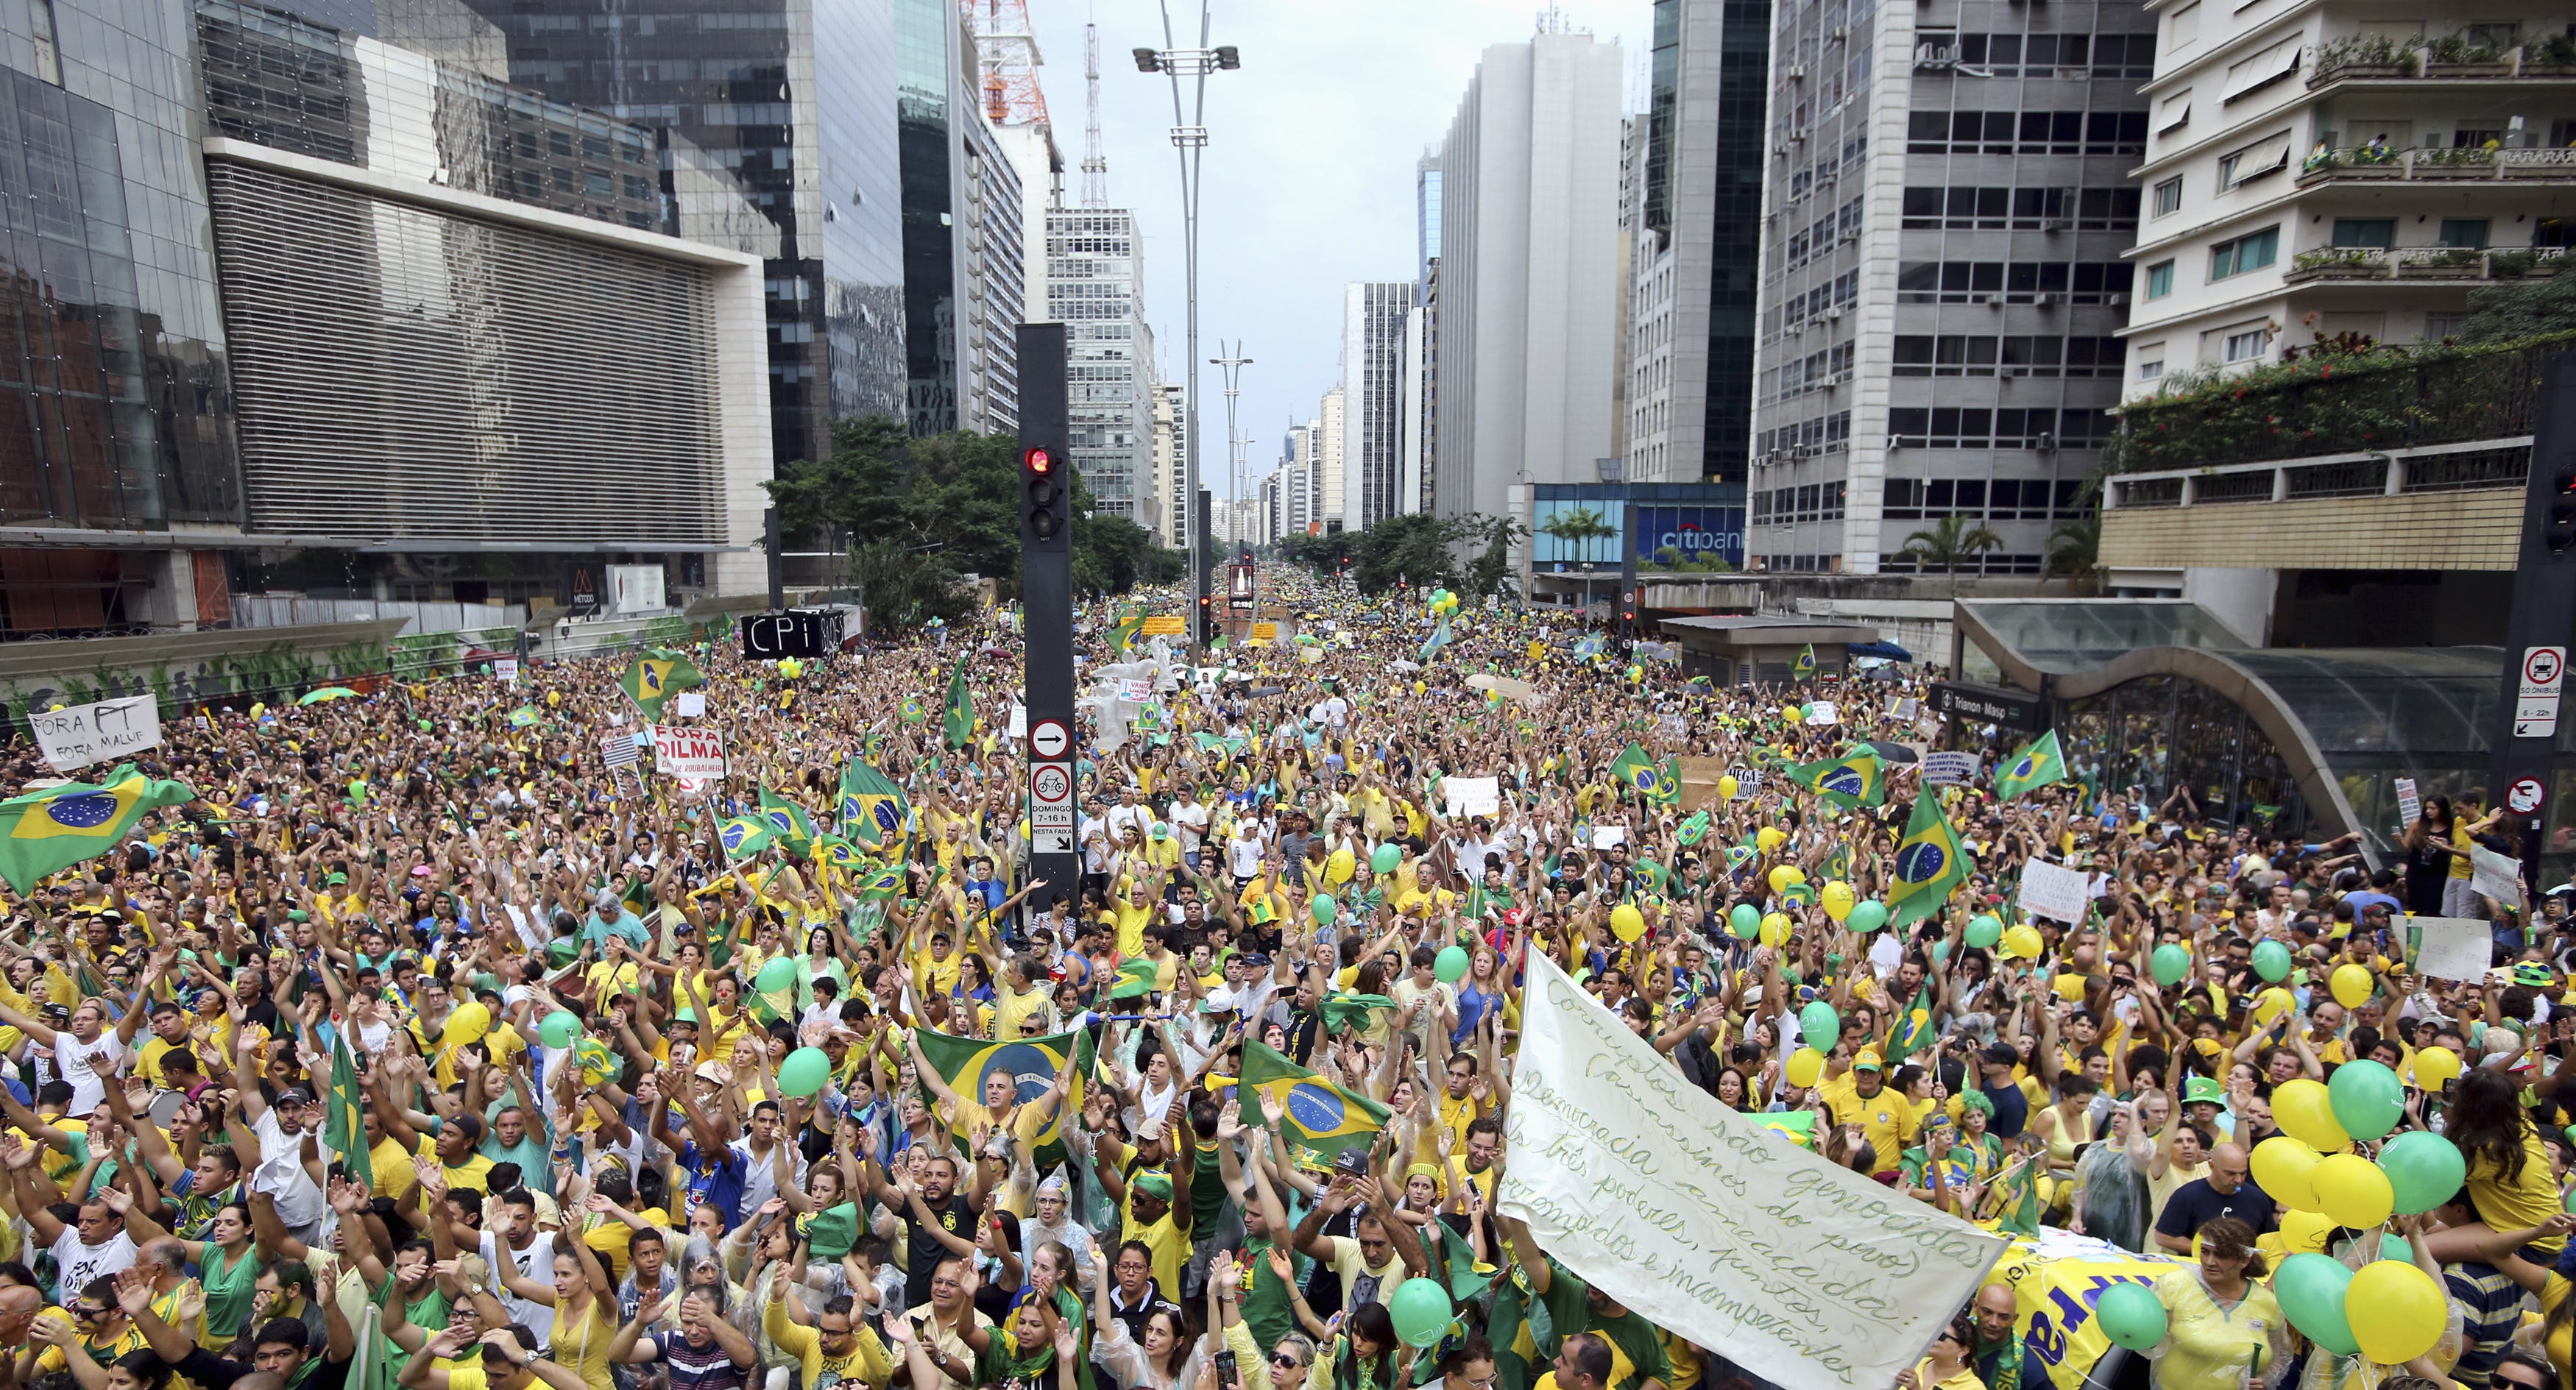 Demonstrators attend a protest against Brazil's President Dilma Rousseff at Paulista avenue in Sao Paulo